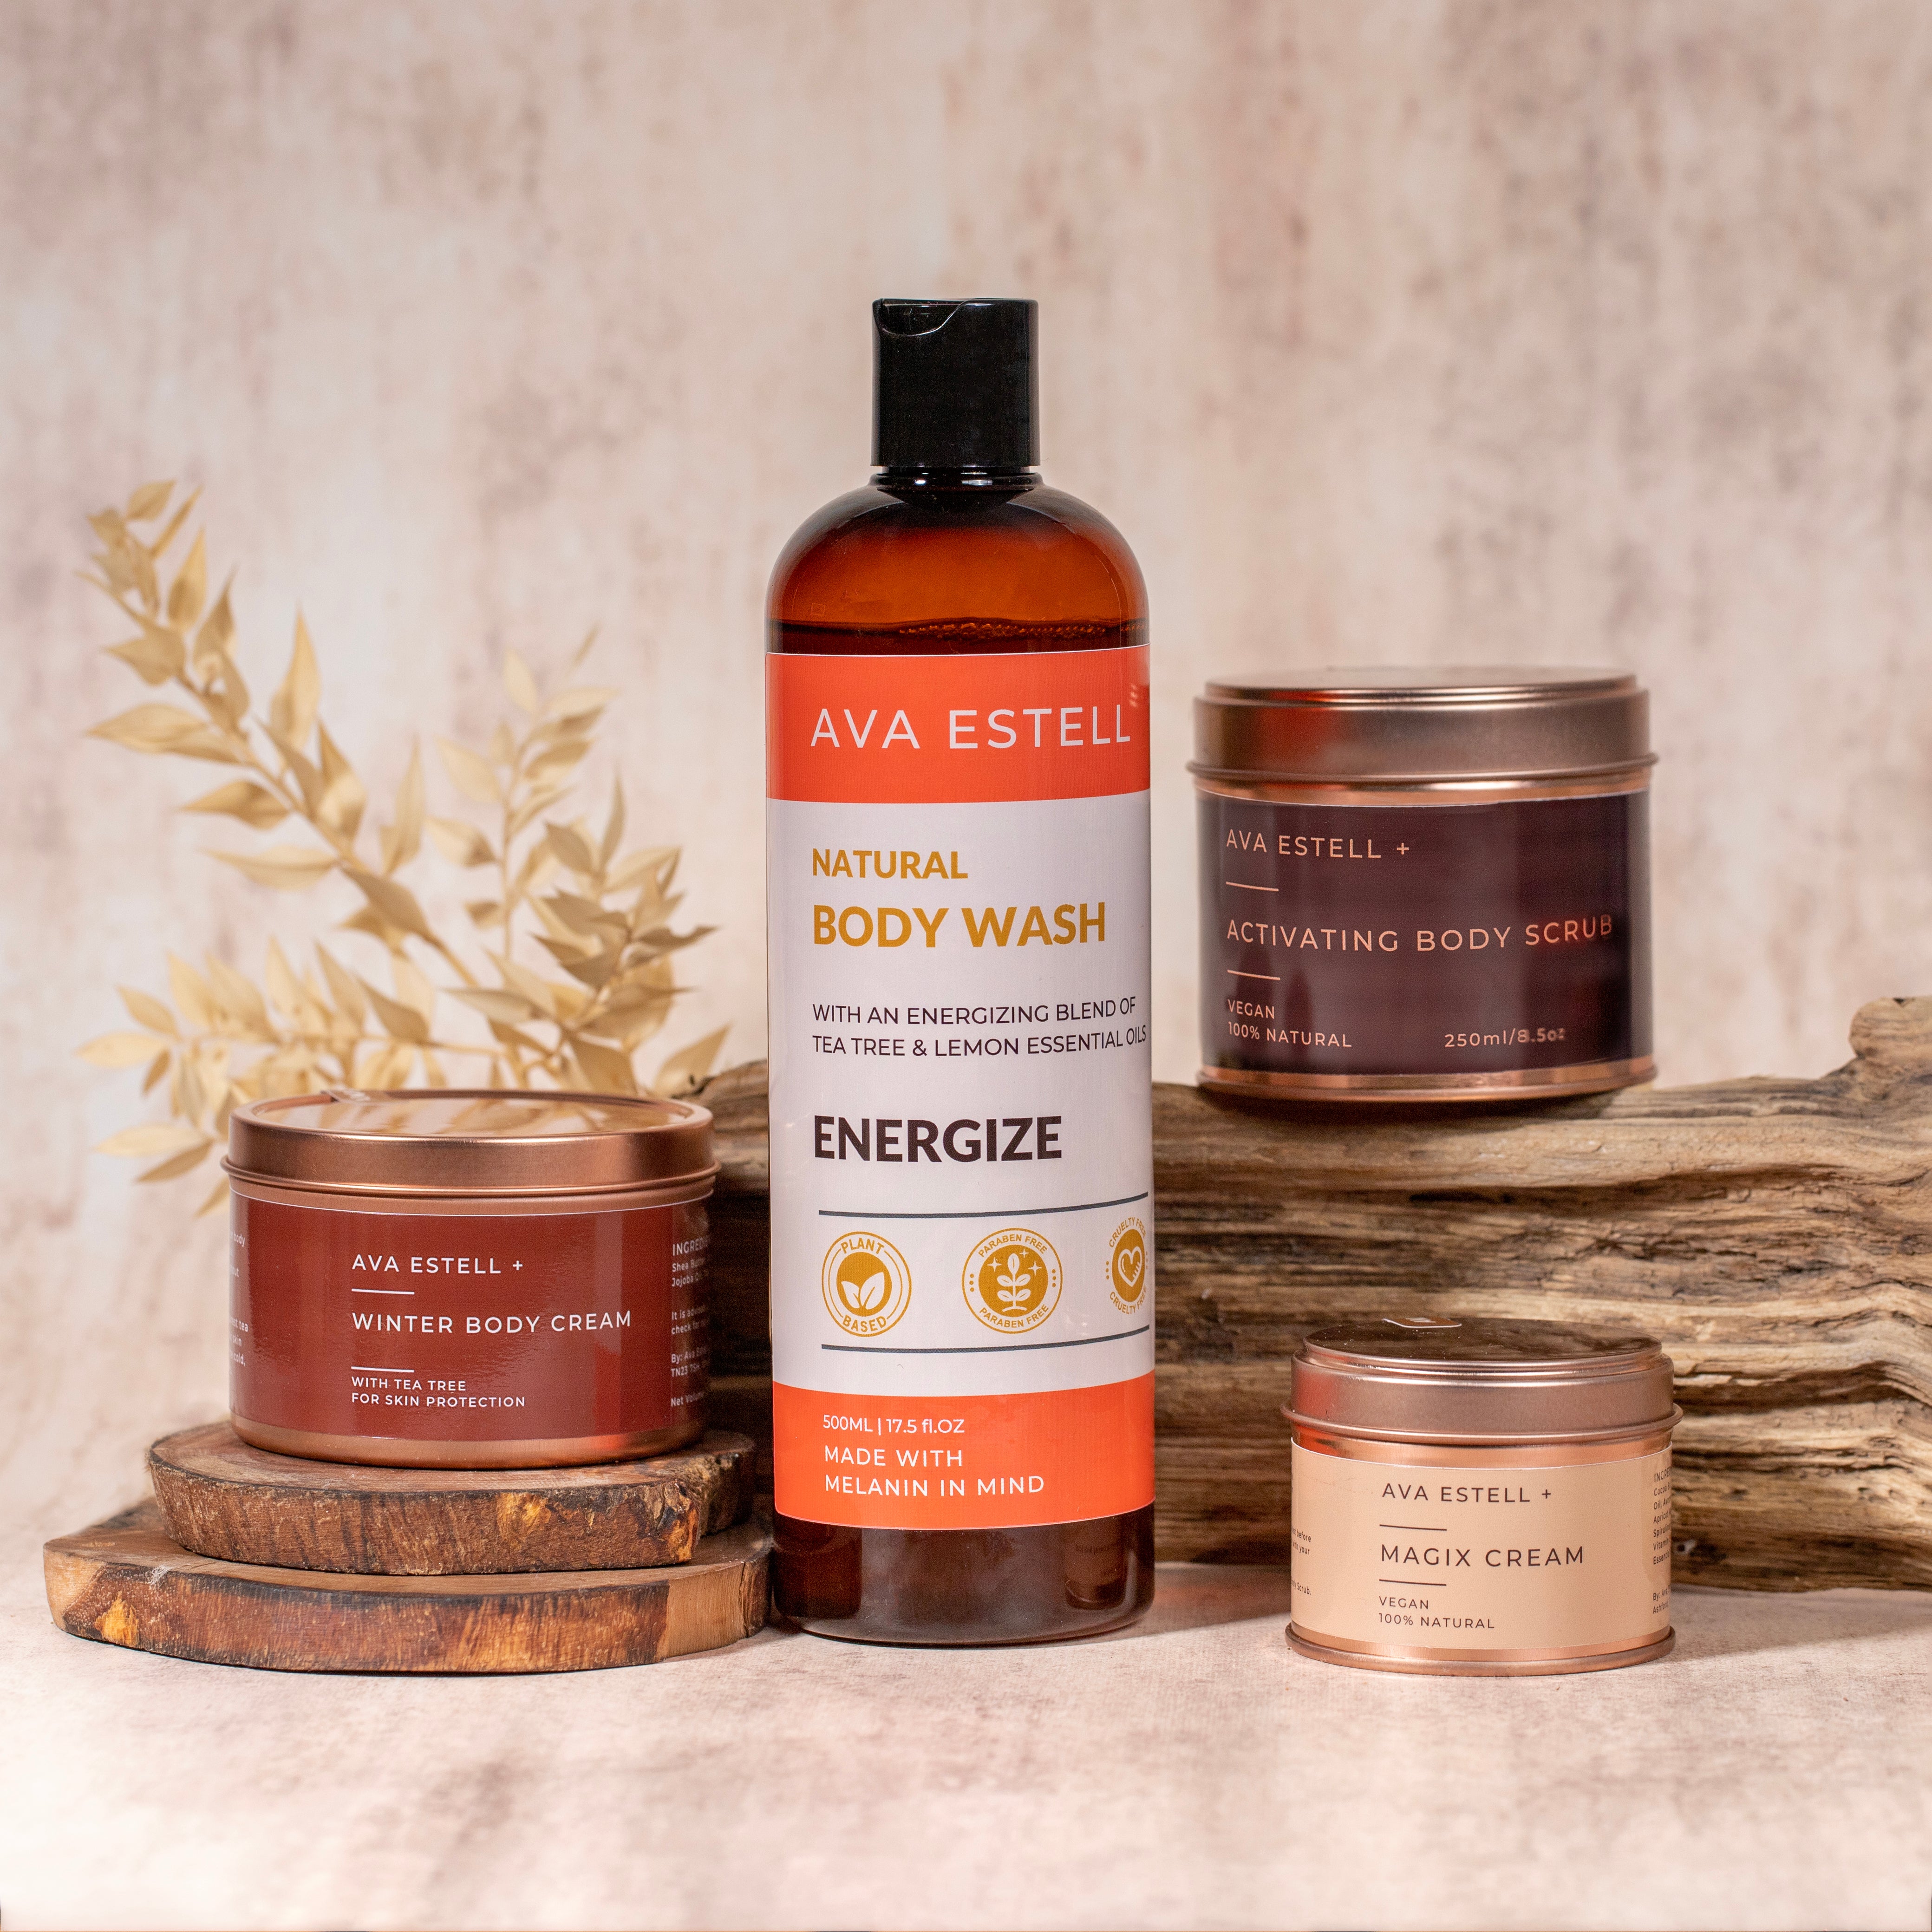 The Ultimate Body Care Set